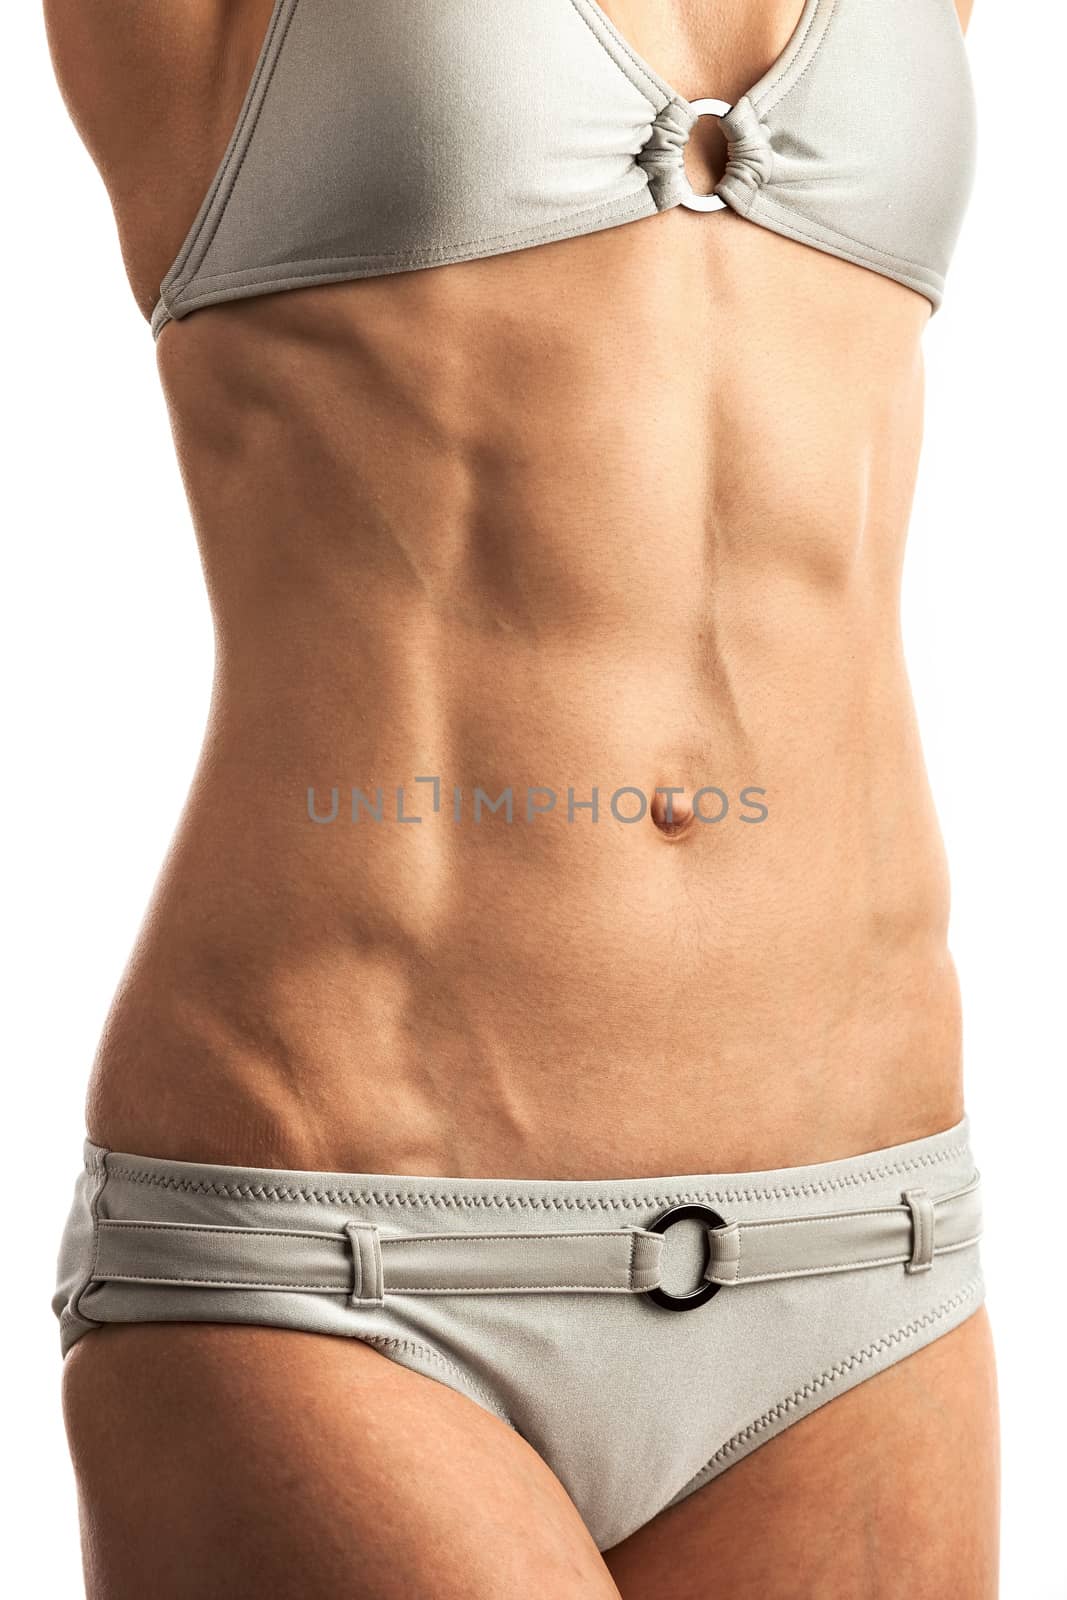 Cropped view of young fitness woman over white background